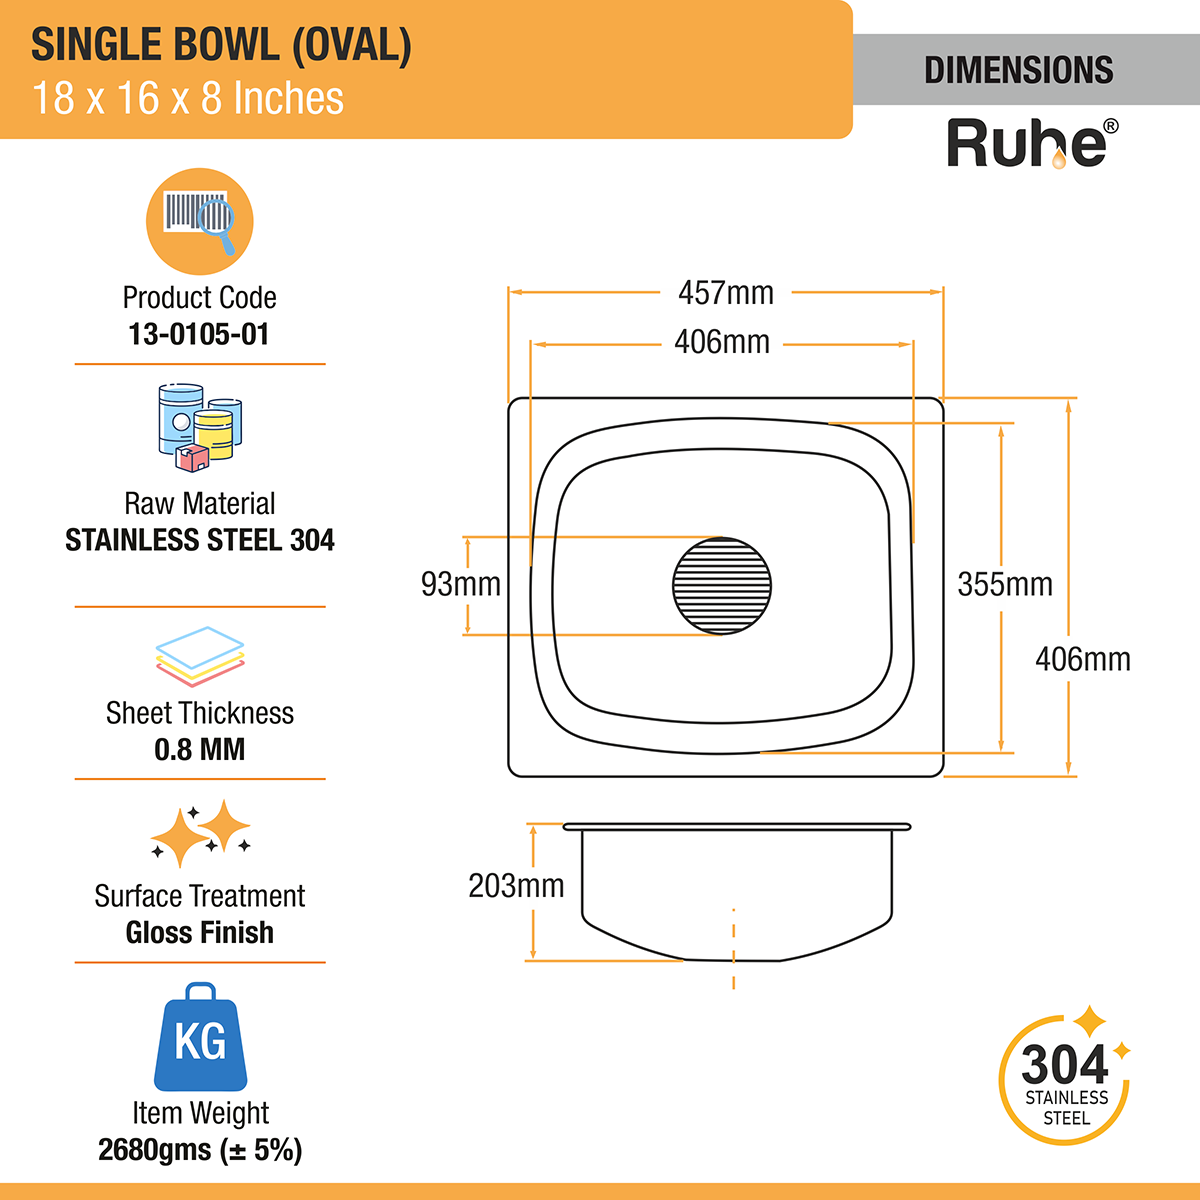 Oval Single Bowl (16 x 18 x 8 inches) 304-Grade Kitchen Sink dimensions and sizes